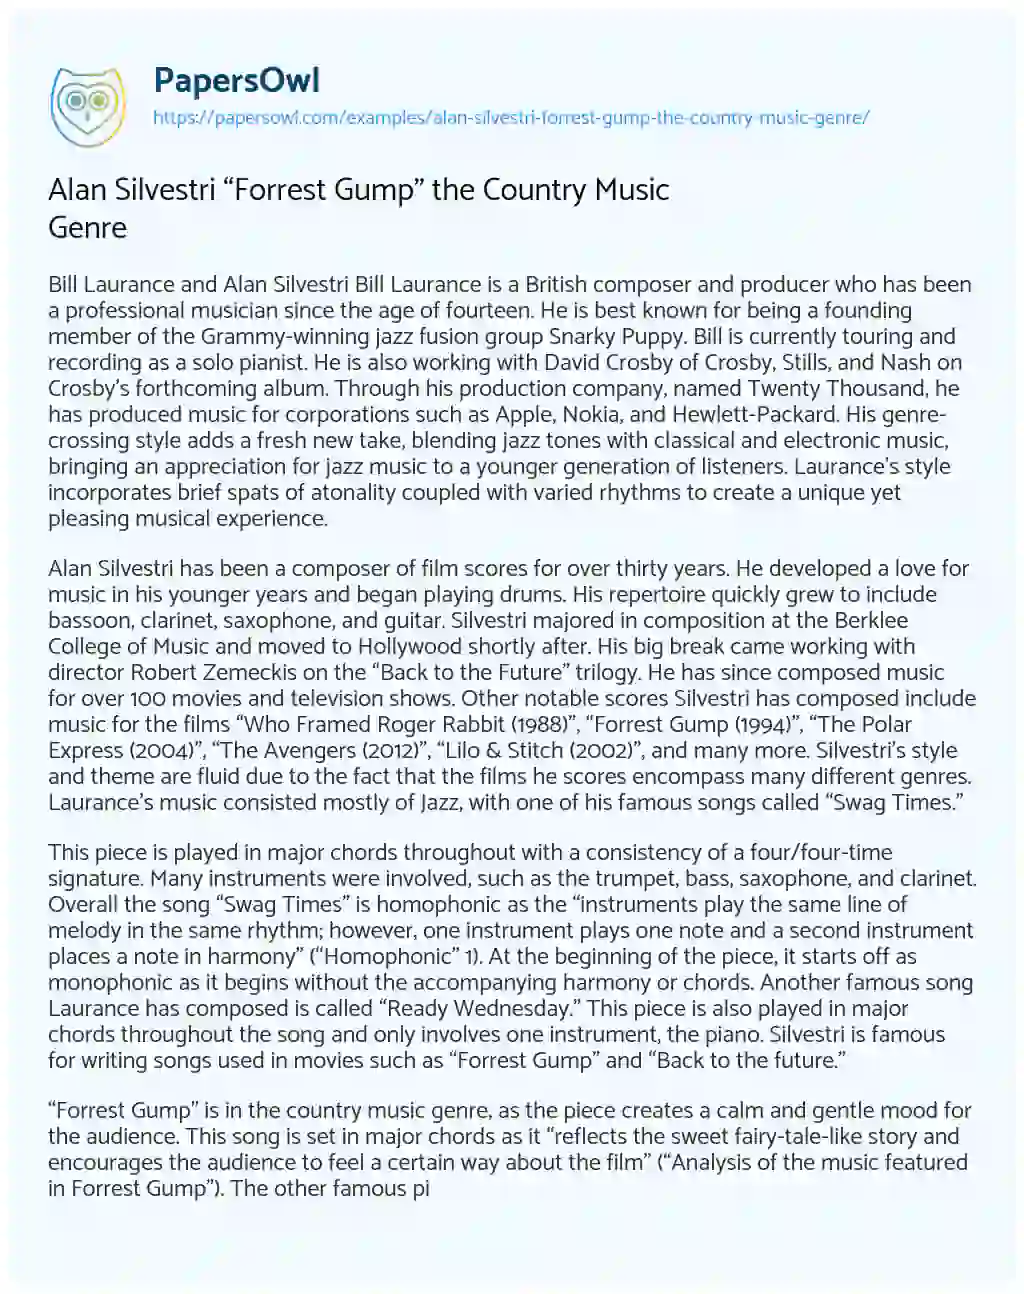 Essay on Alan Silvestri “Forrest Gump” the Country Music Genre